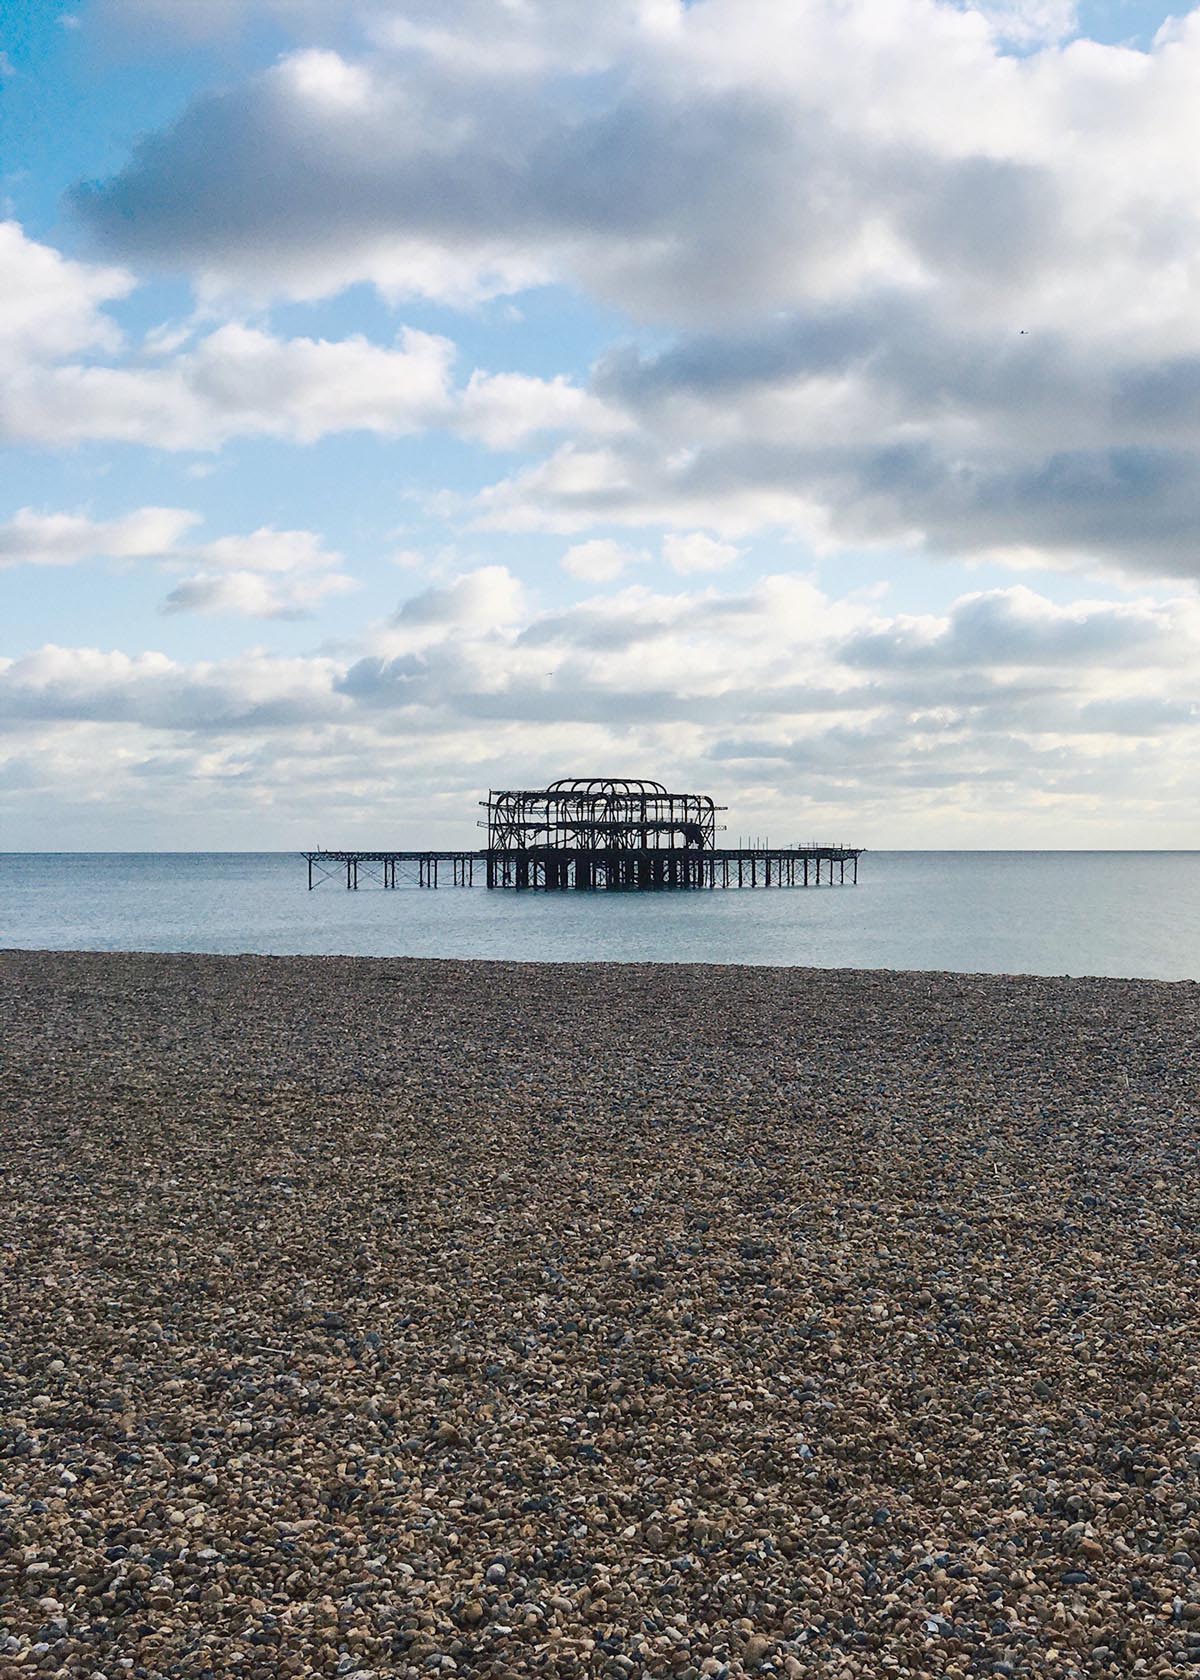 Brighton old pier on a partly cloudy day.